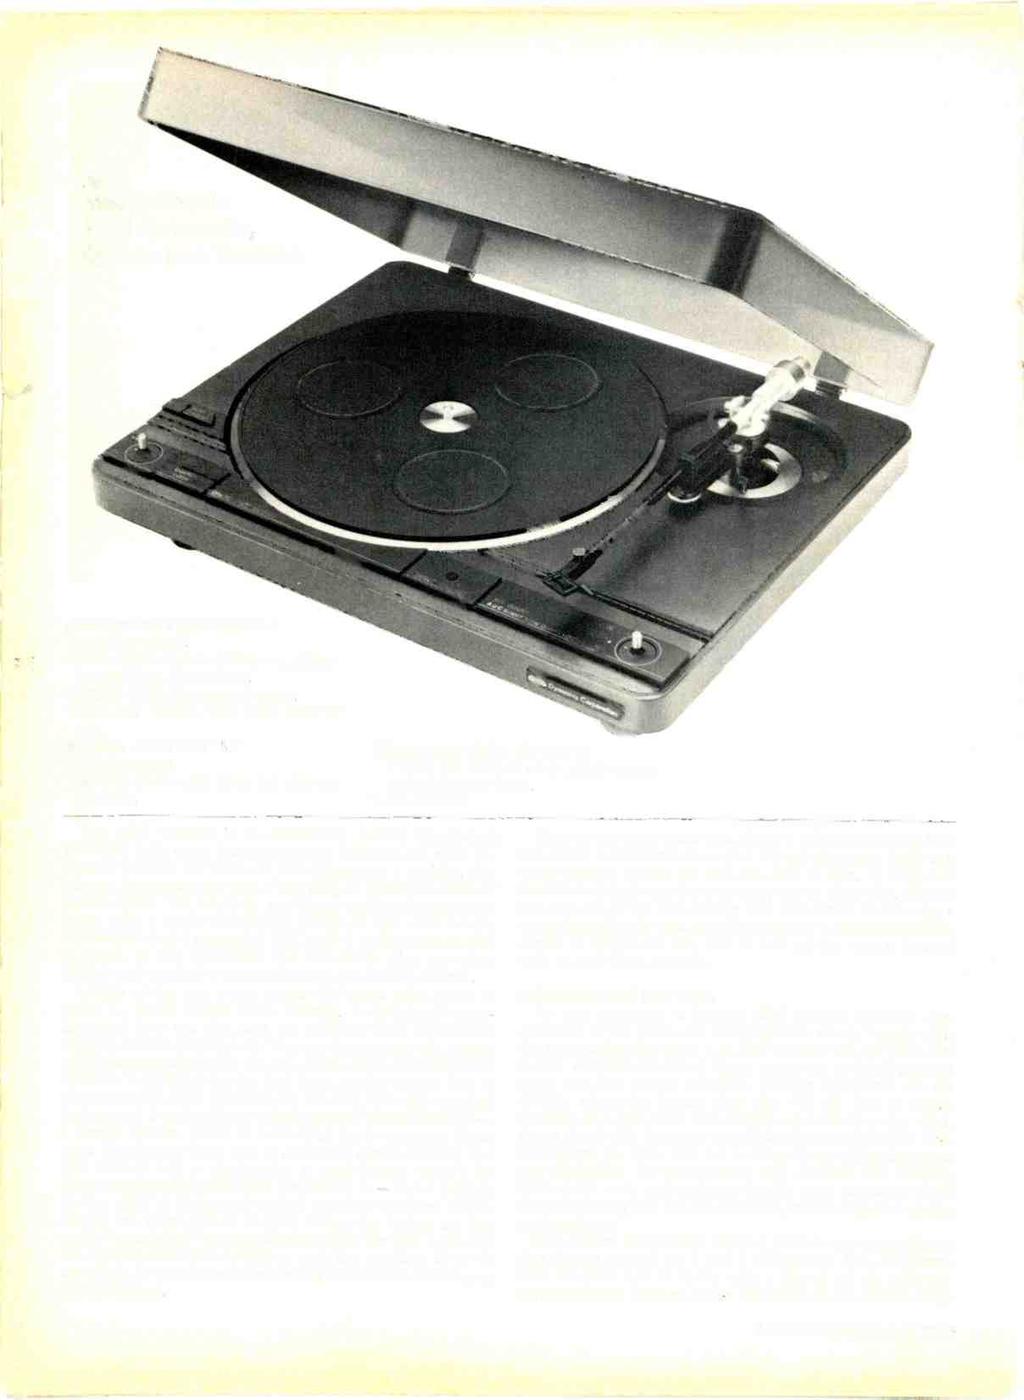 ADC Model 1700DD Semi -Automatic, Quartz- Lock Turntable Manufacturer's Specifications Type: Two speed. 84 Motor Type: Quartz -reference, phase - locked loop, direct drive.